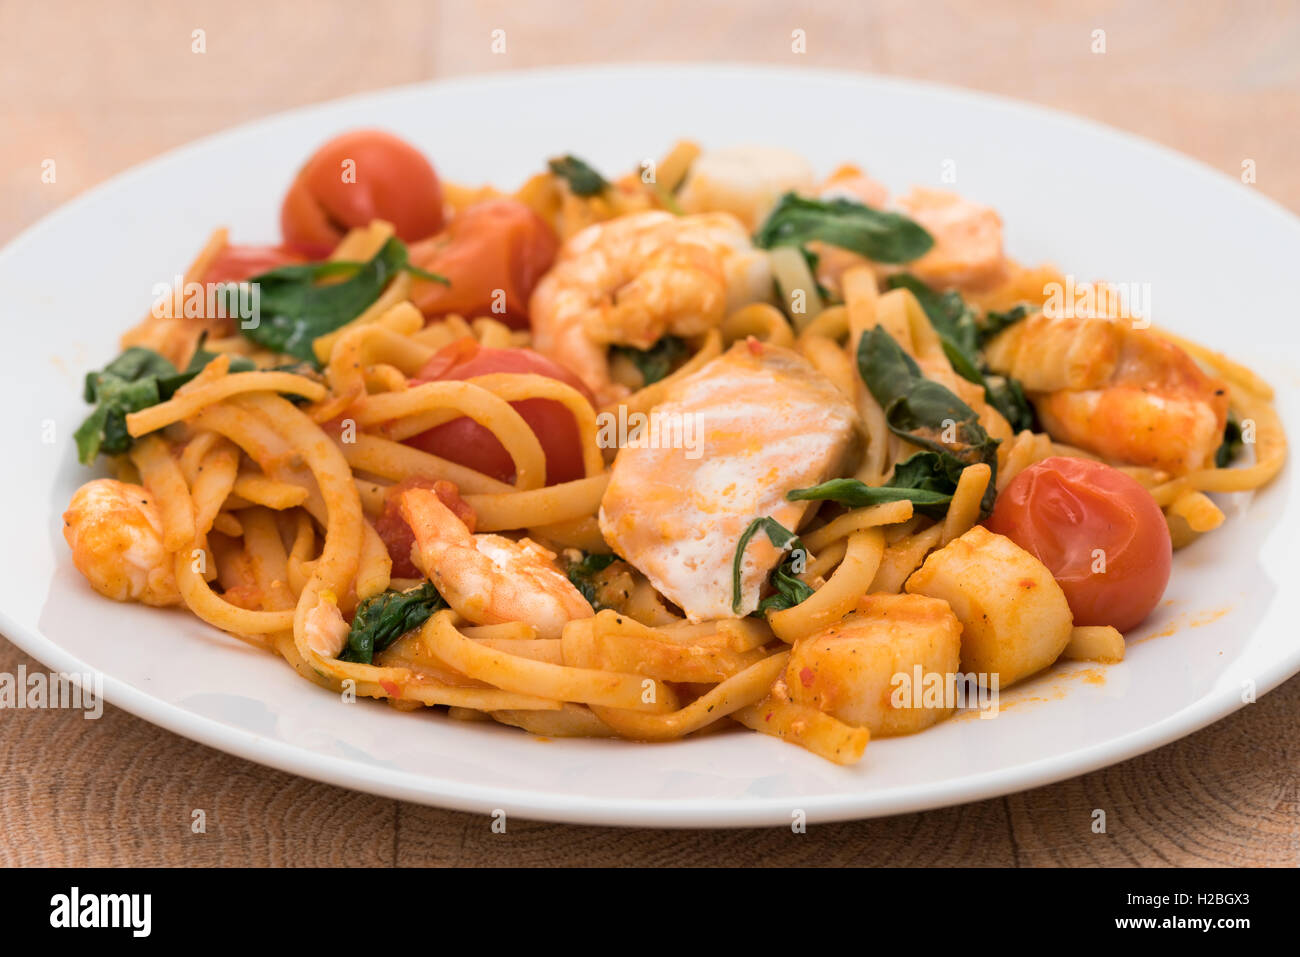 Seafood linguine pasta with king prawns, scallops, and salmon Stock Photo